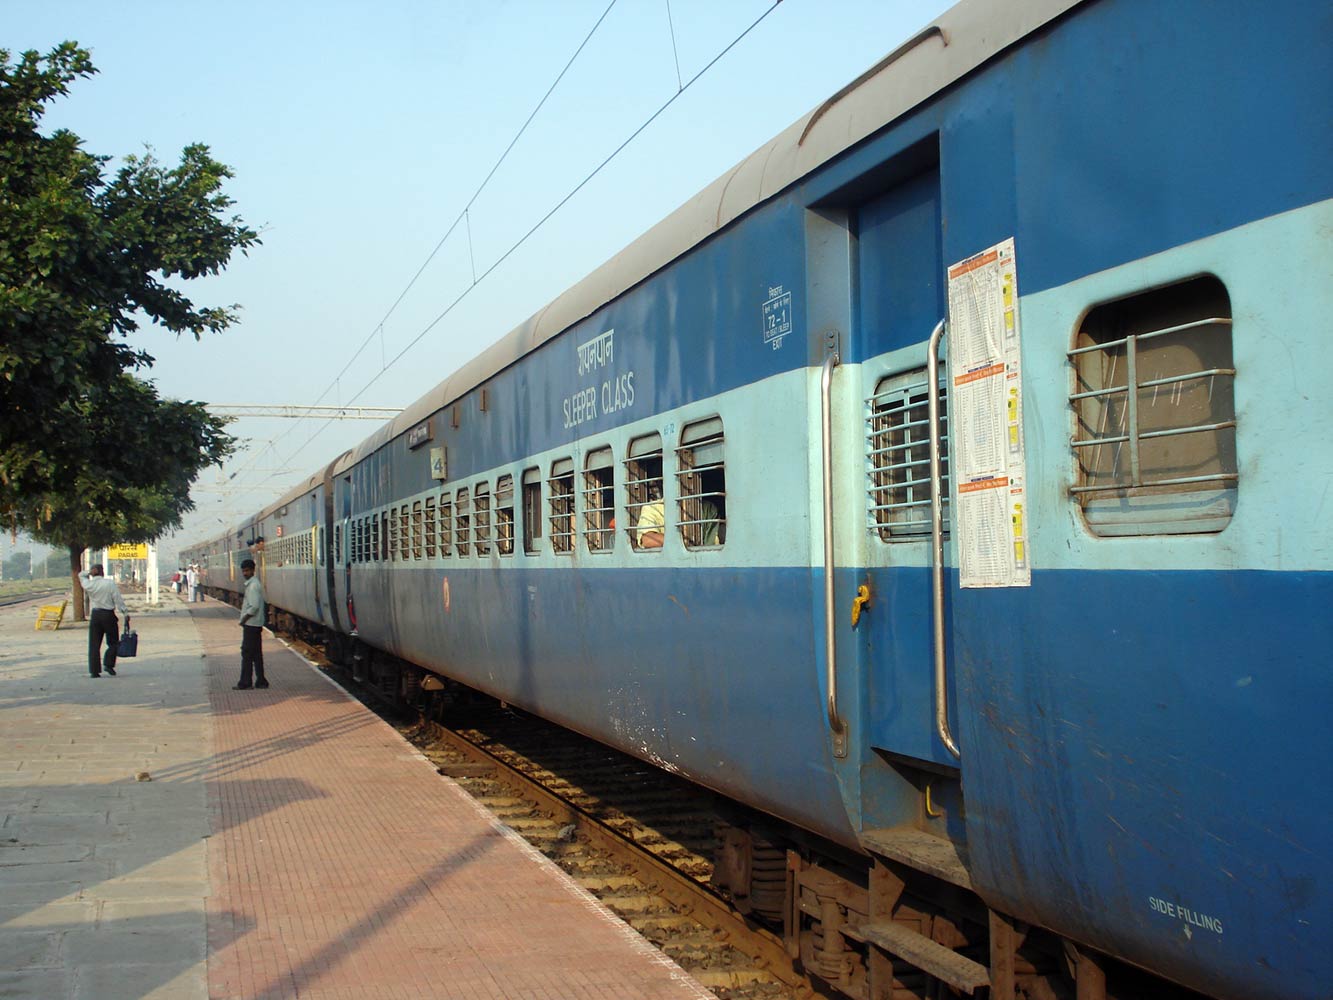 the side of a blue passenger train on a track